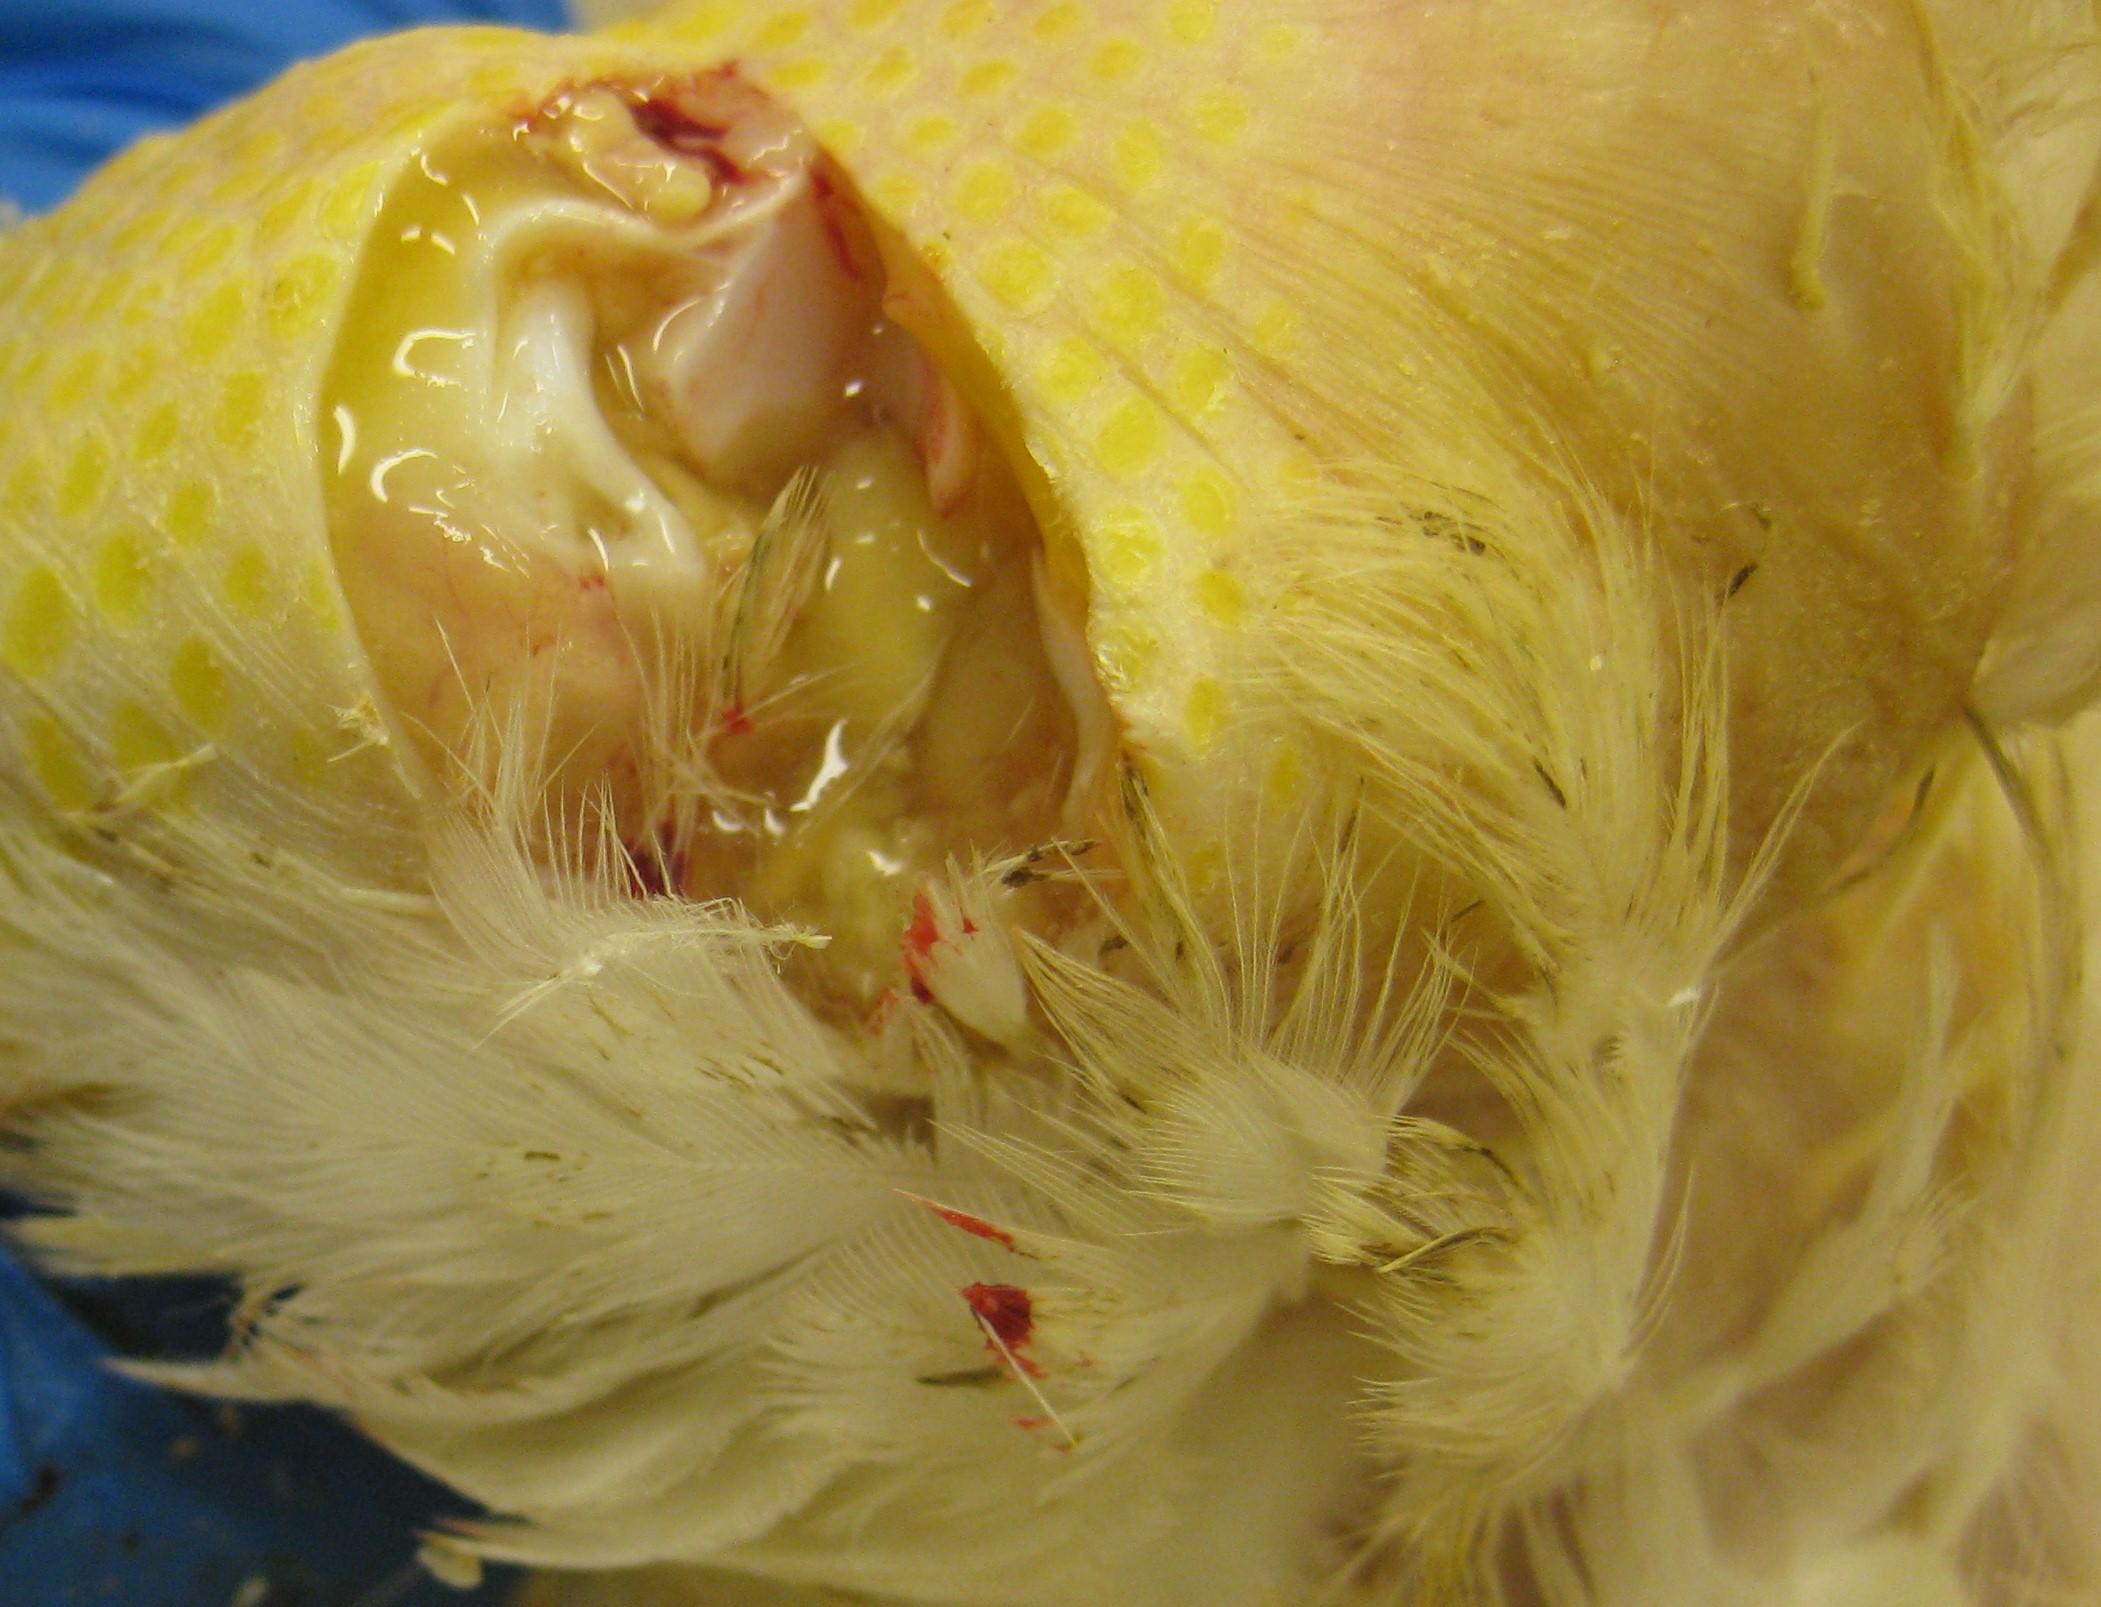 Swollen joint, poultry